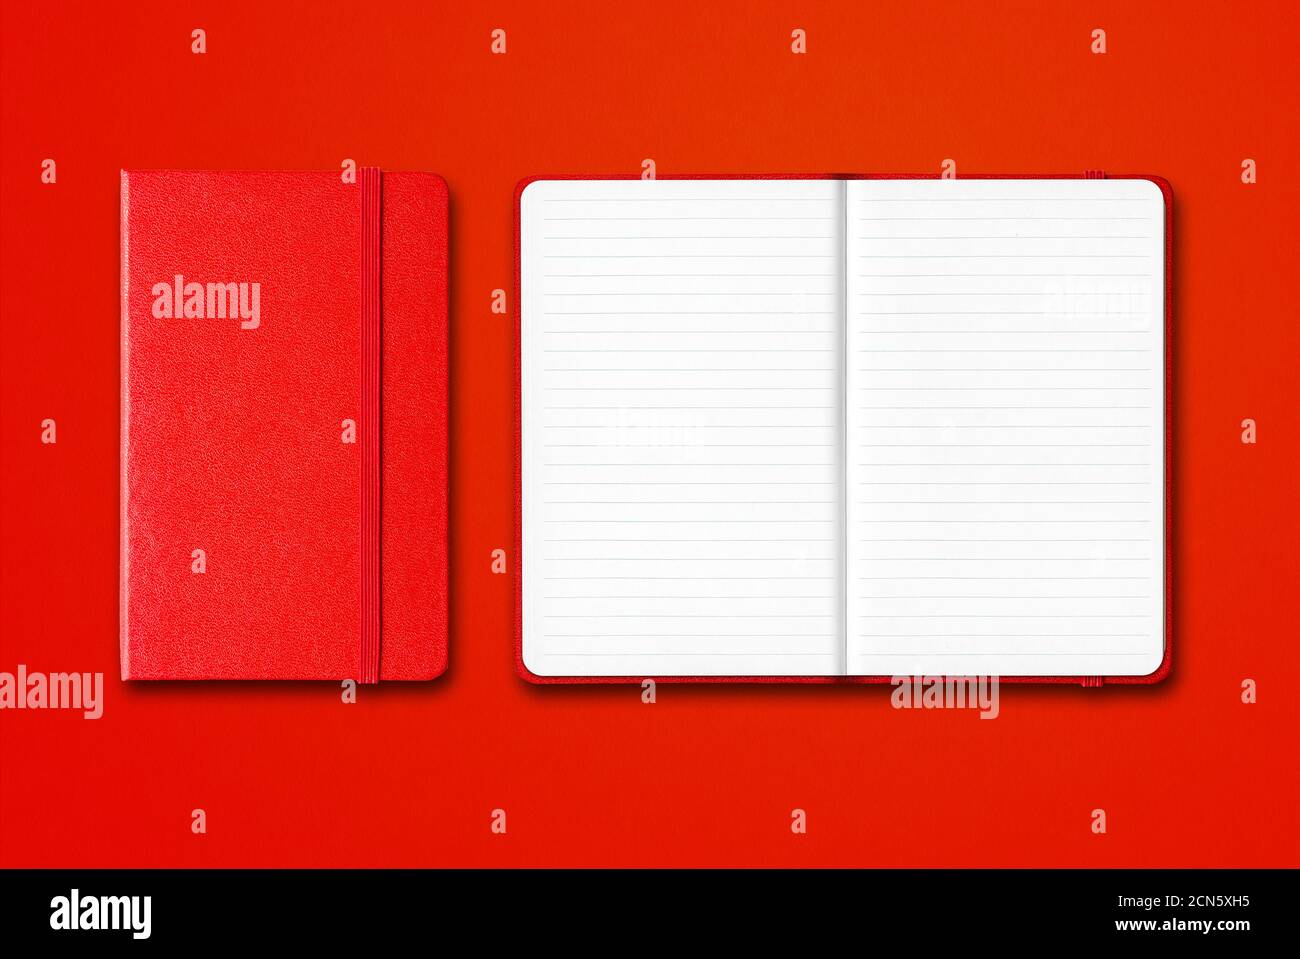 Red closed and open lined notebooks isolated on colorful background Stock Photo